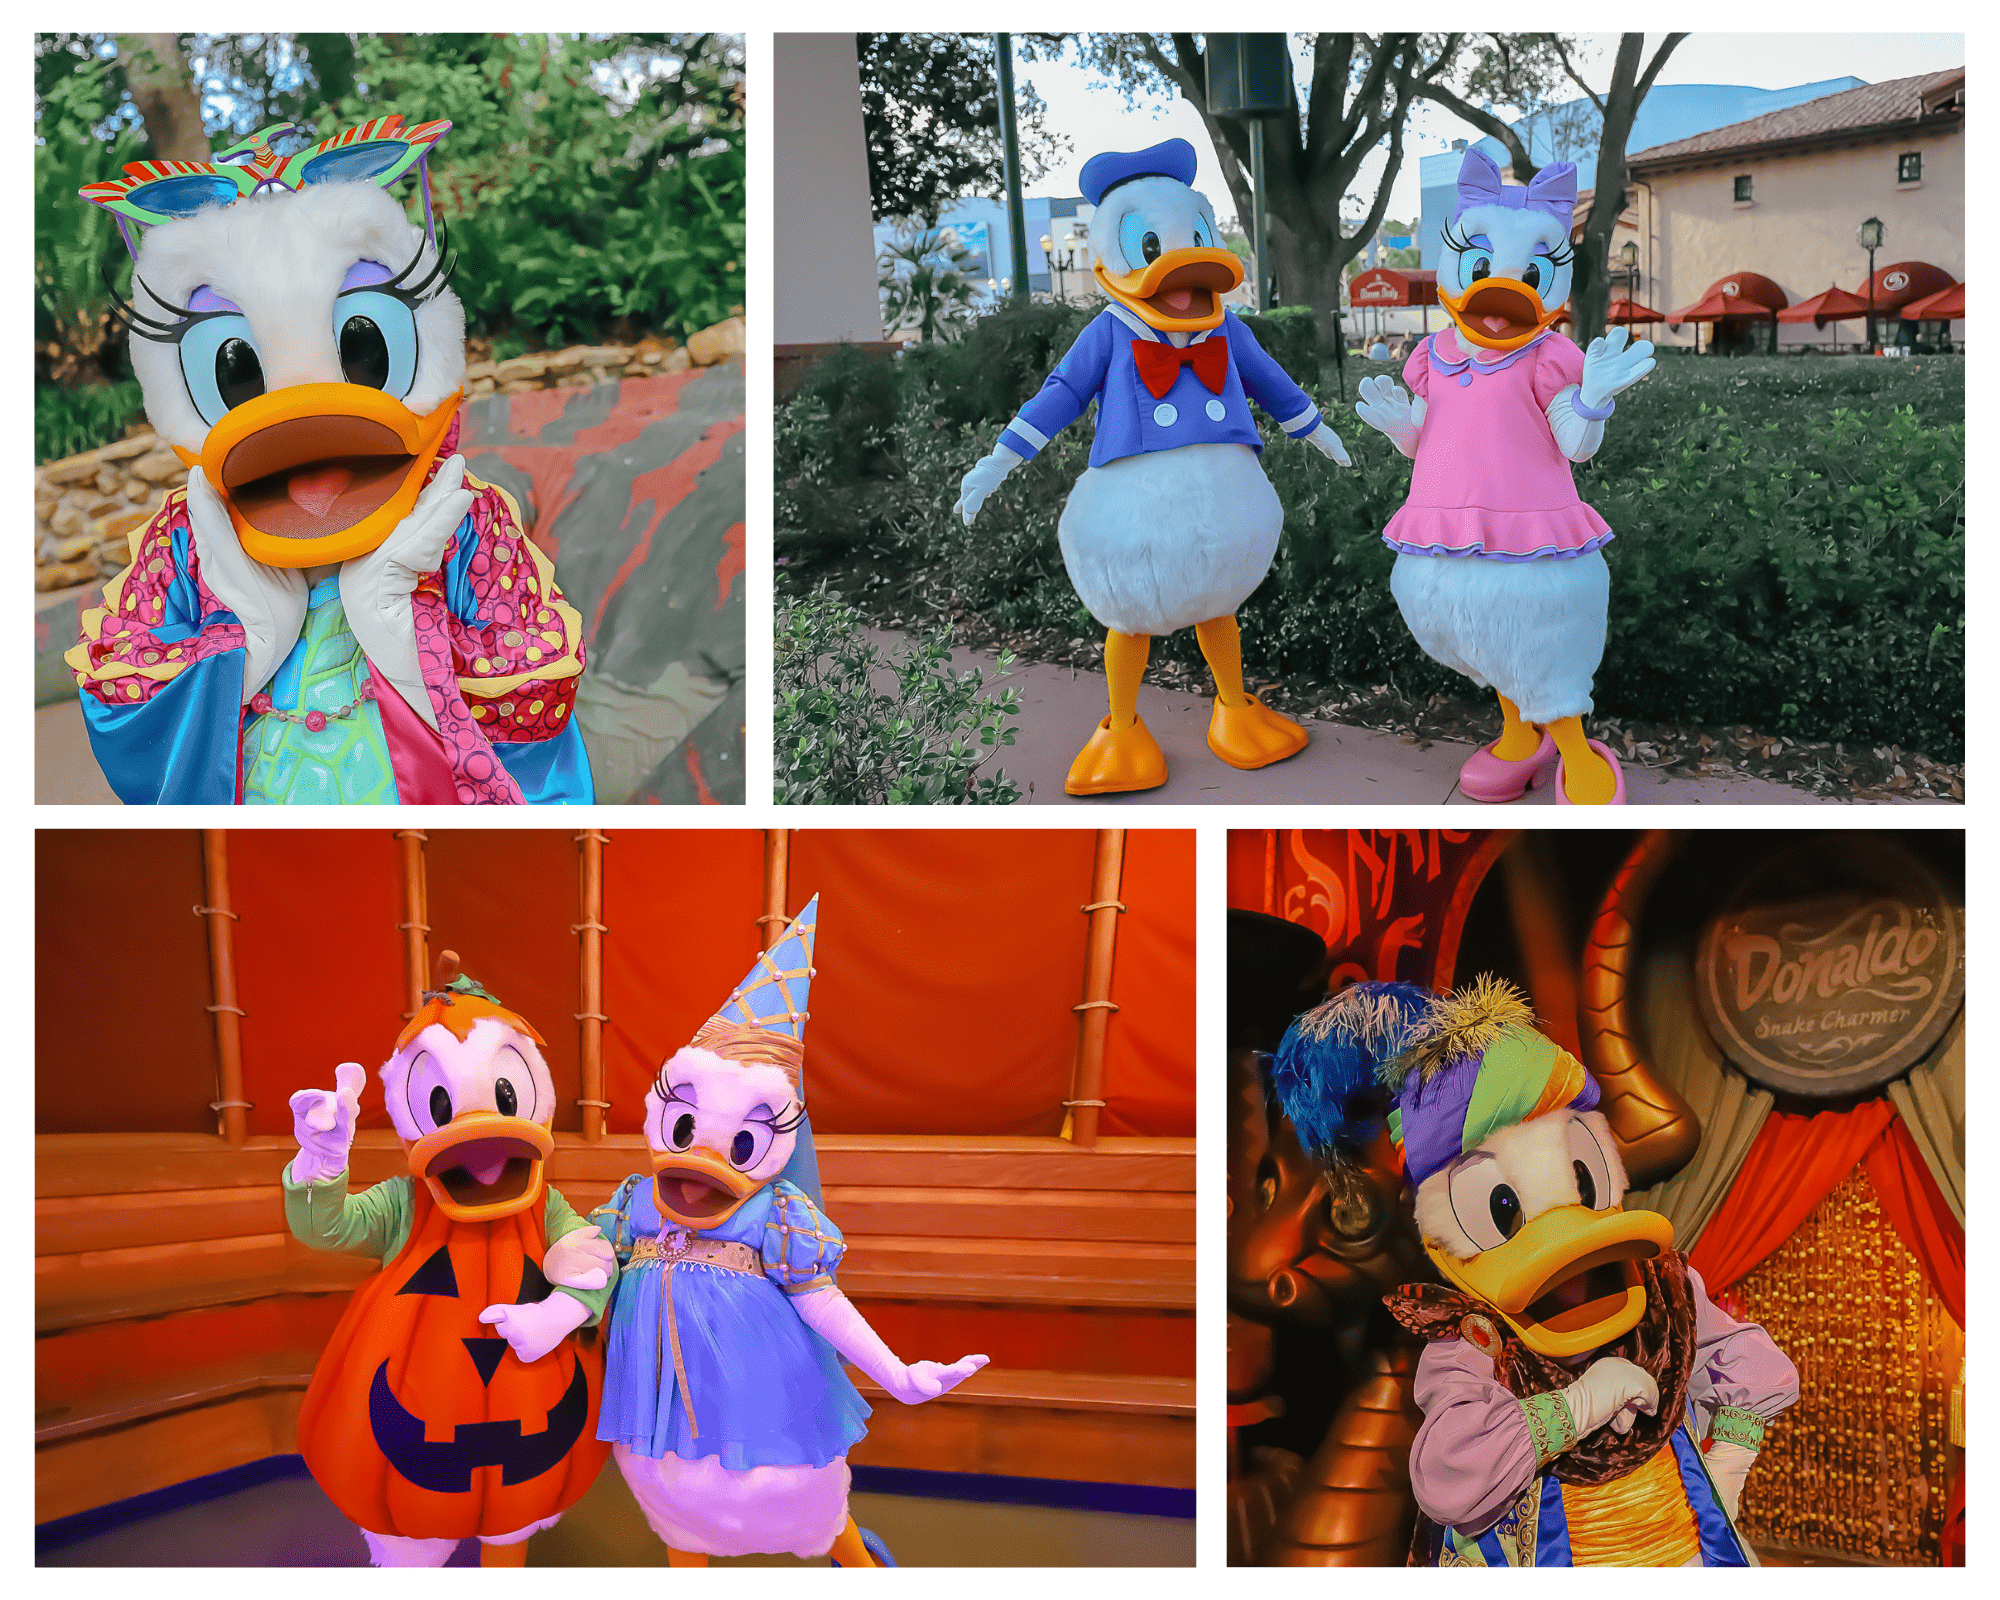 Locations for meeting Donald and Daisy Duck at Disney World